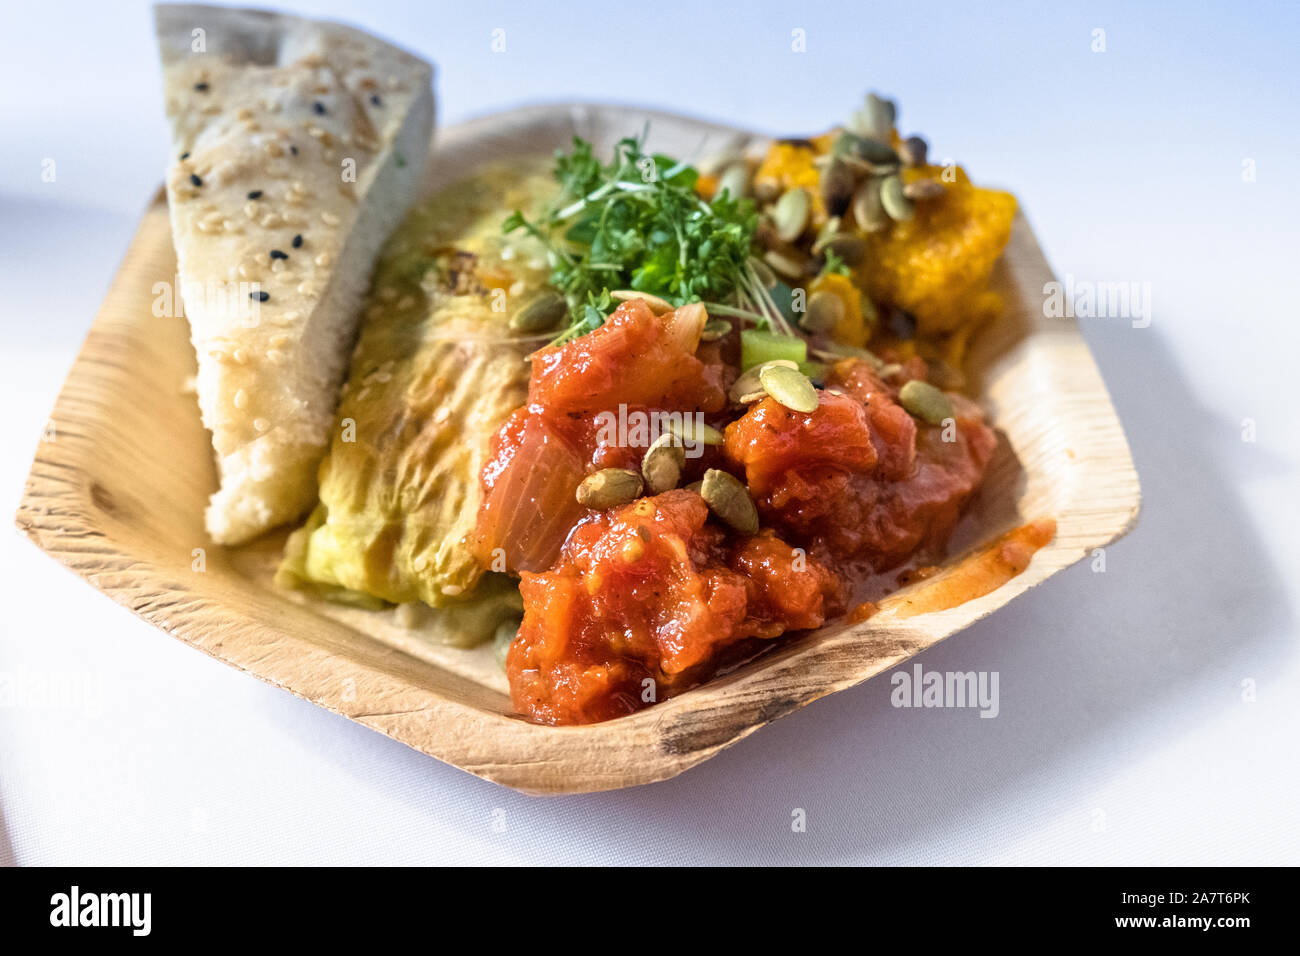 Vegetarian food lies in a disposable plate Stock Photo